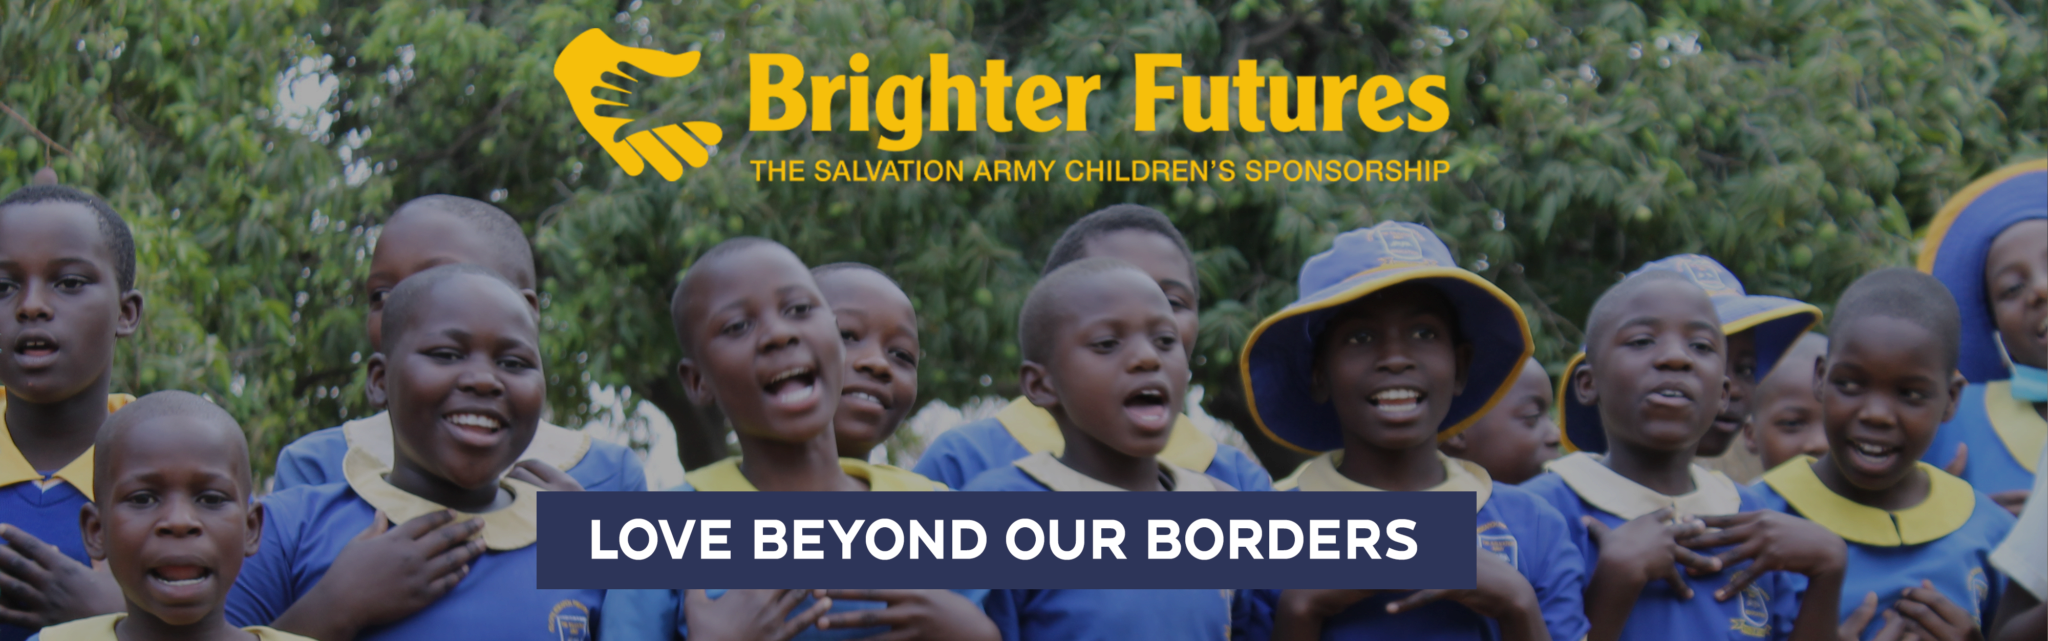 Brighter Futures banner with photos of students from Bangladesh smiling 